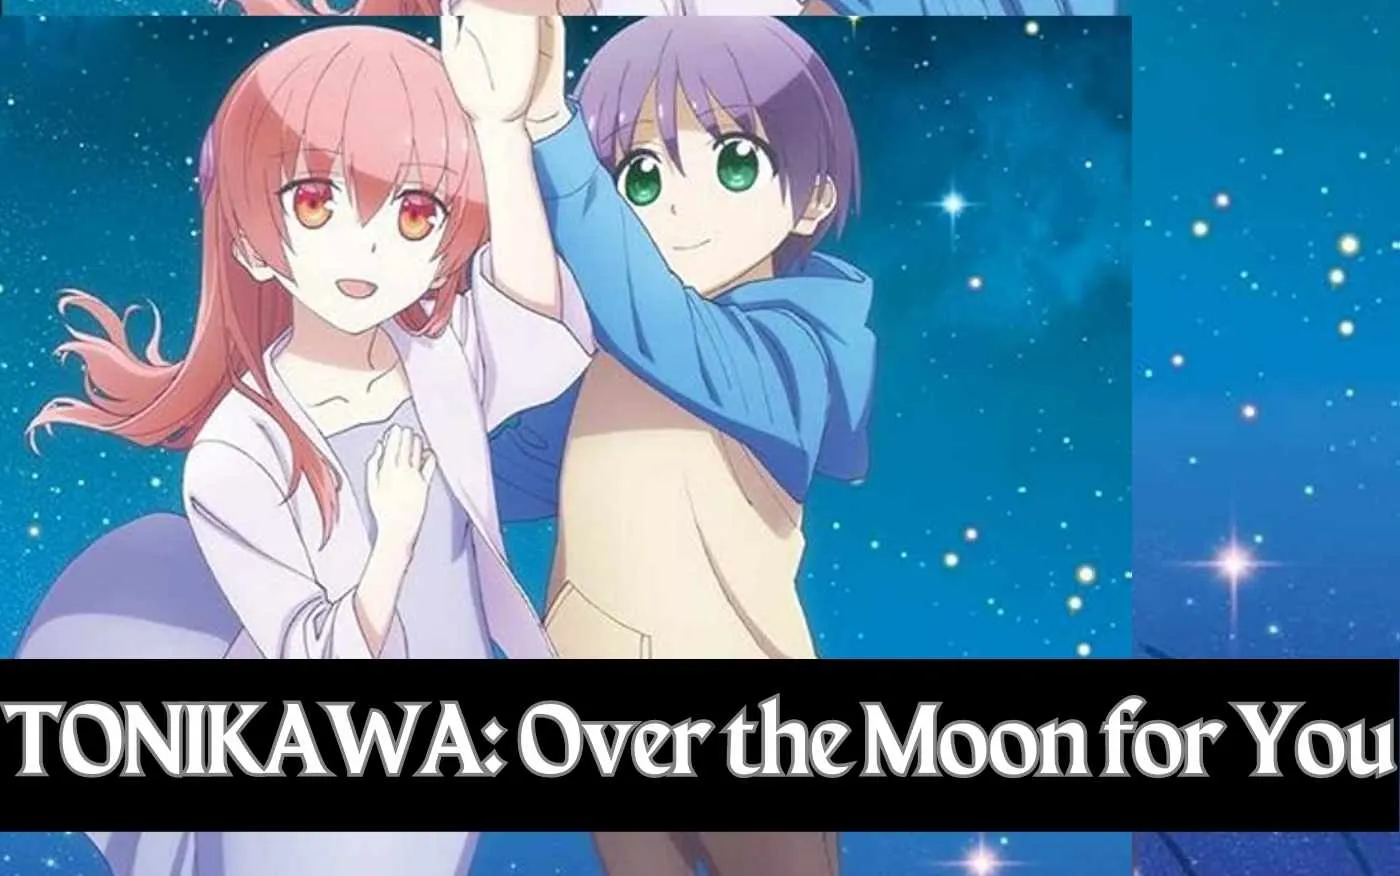 TONIKAWA: Over The Moon For You Parents Guide